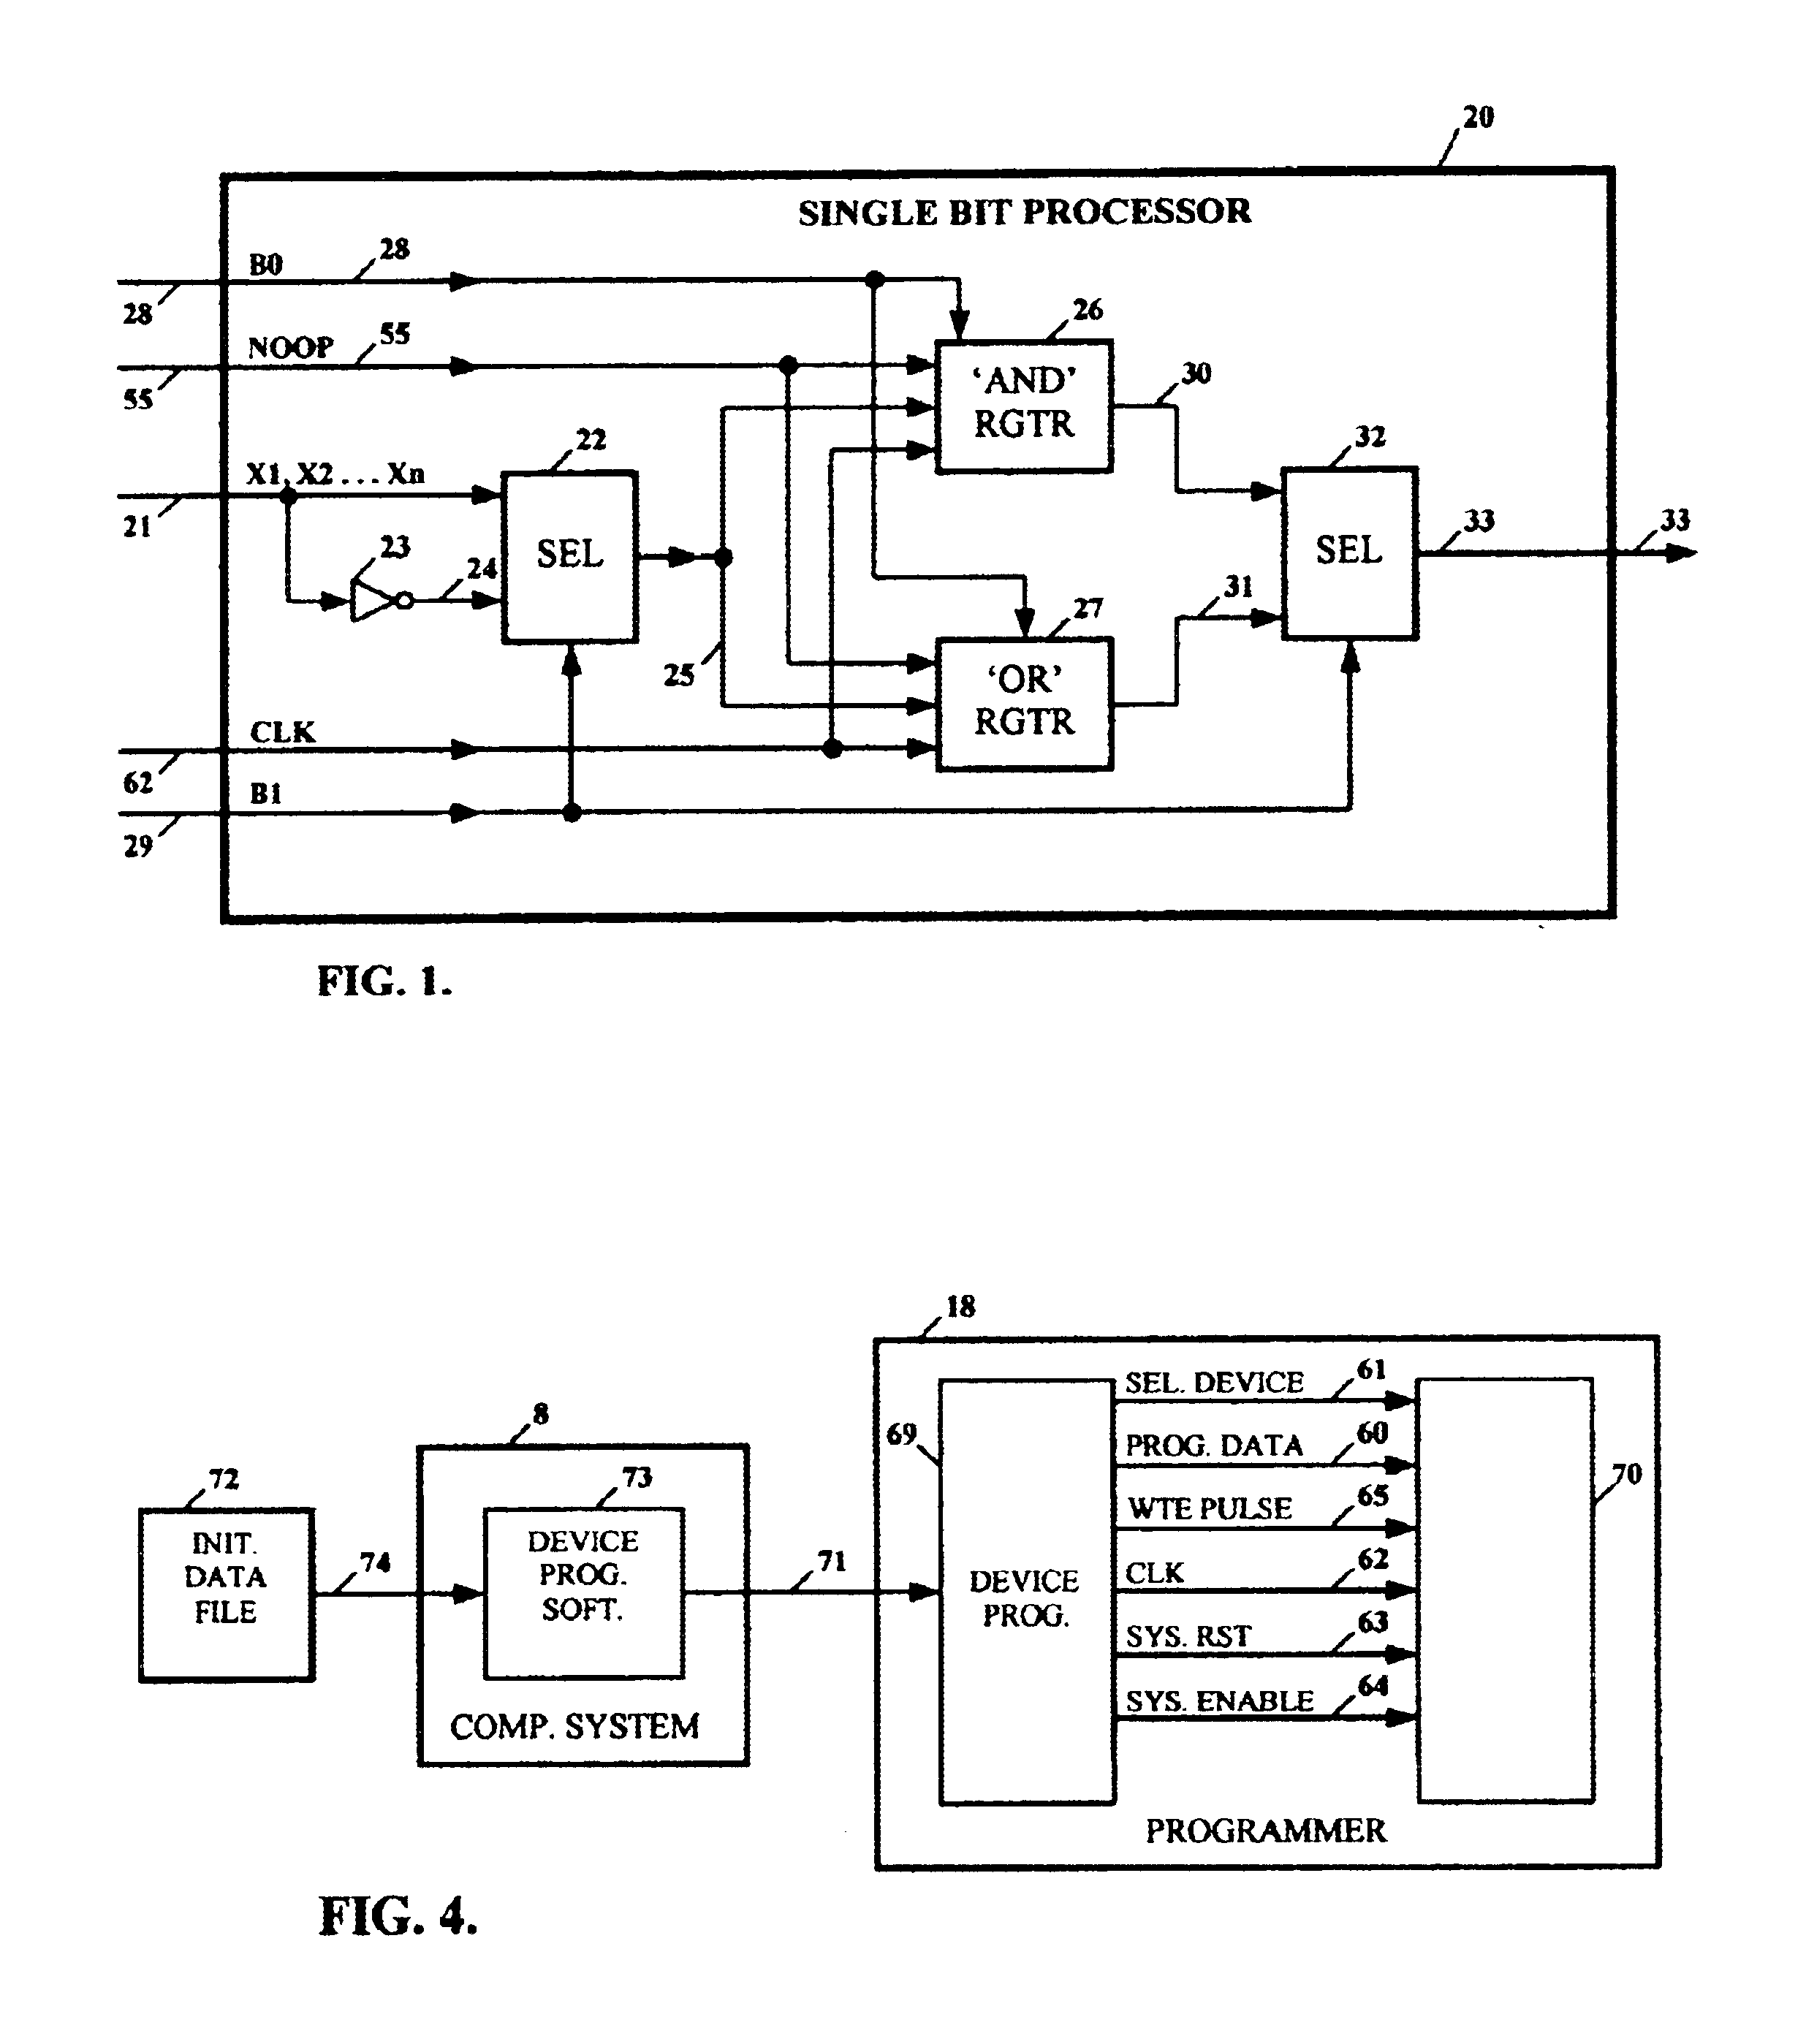 Compiler synchronized multi-processor programmable logic device with direct transfer of computation results among processors